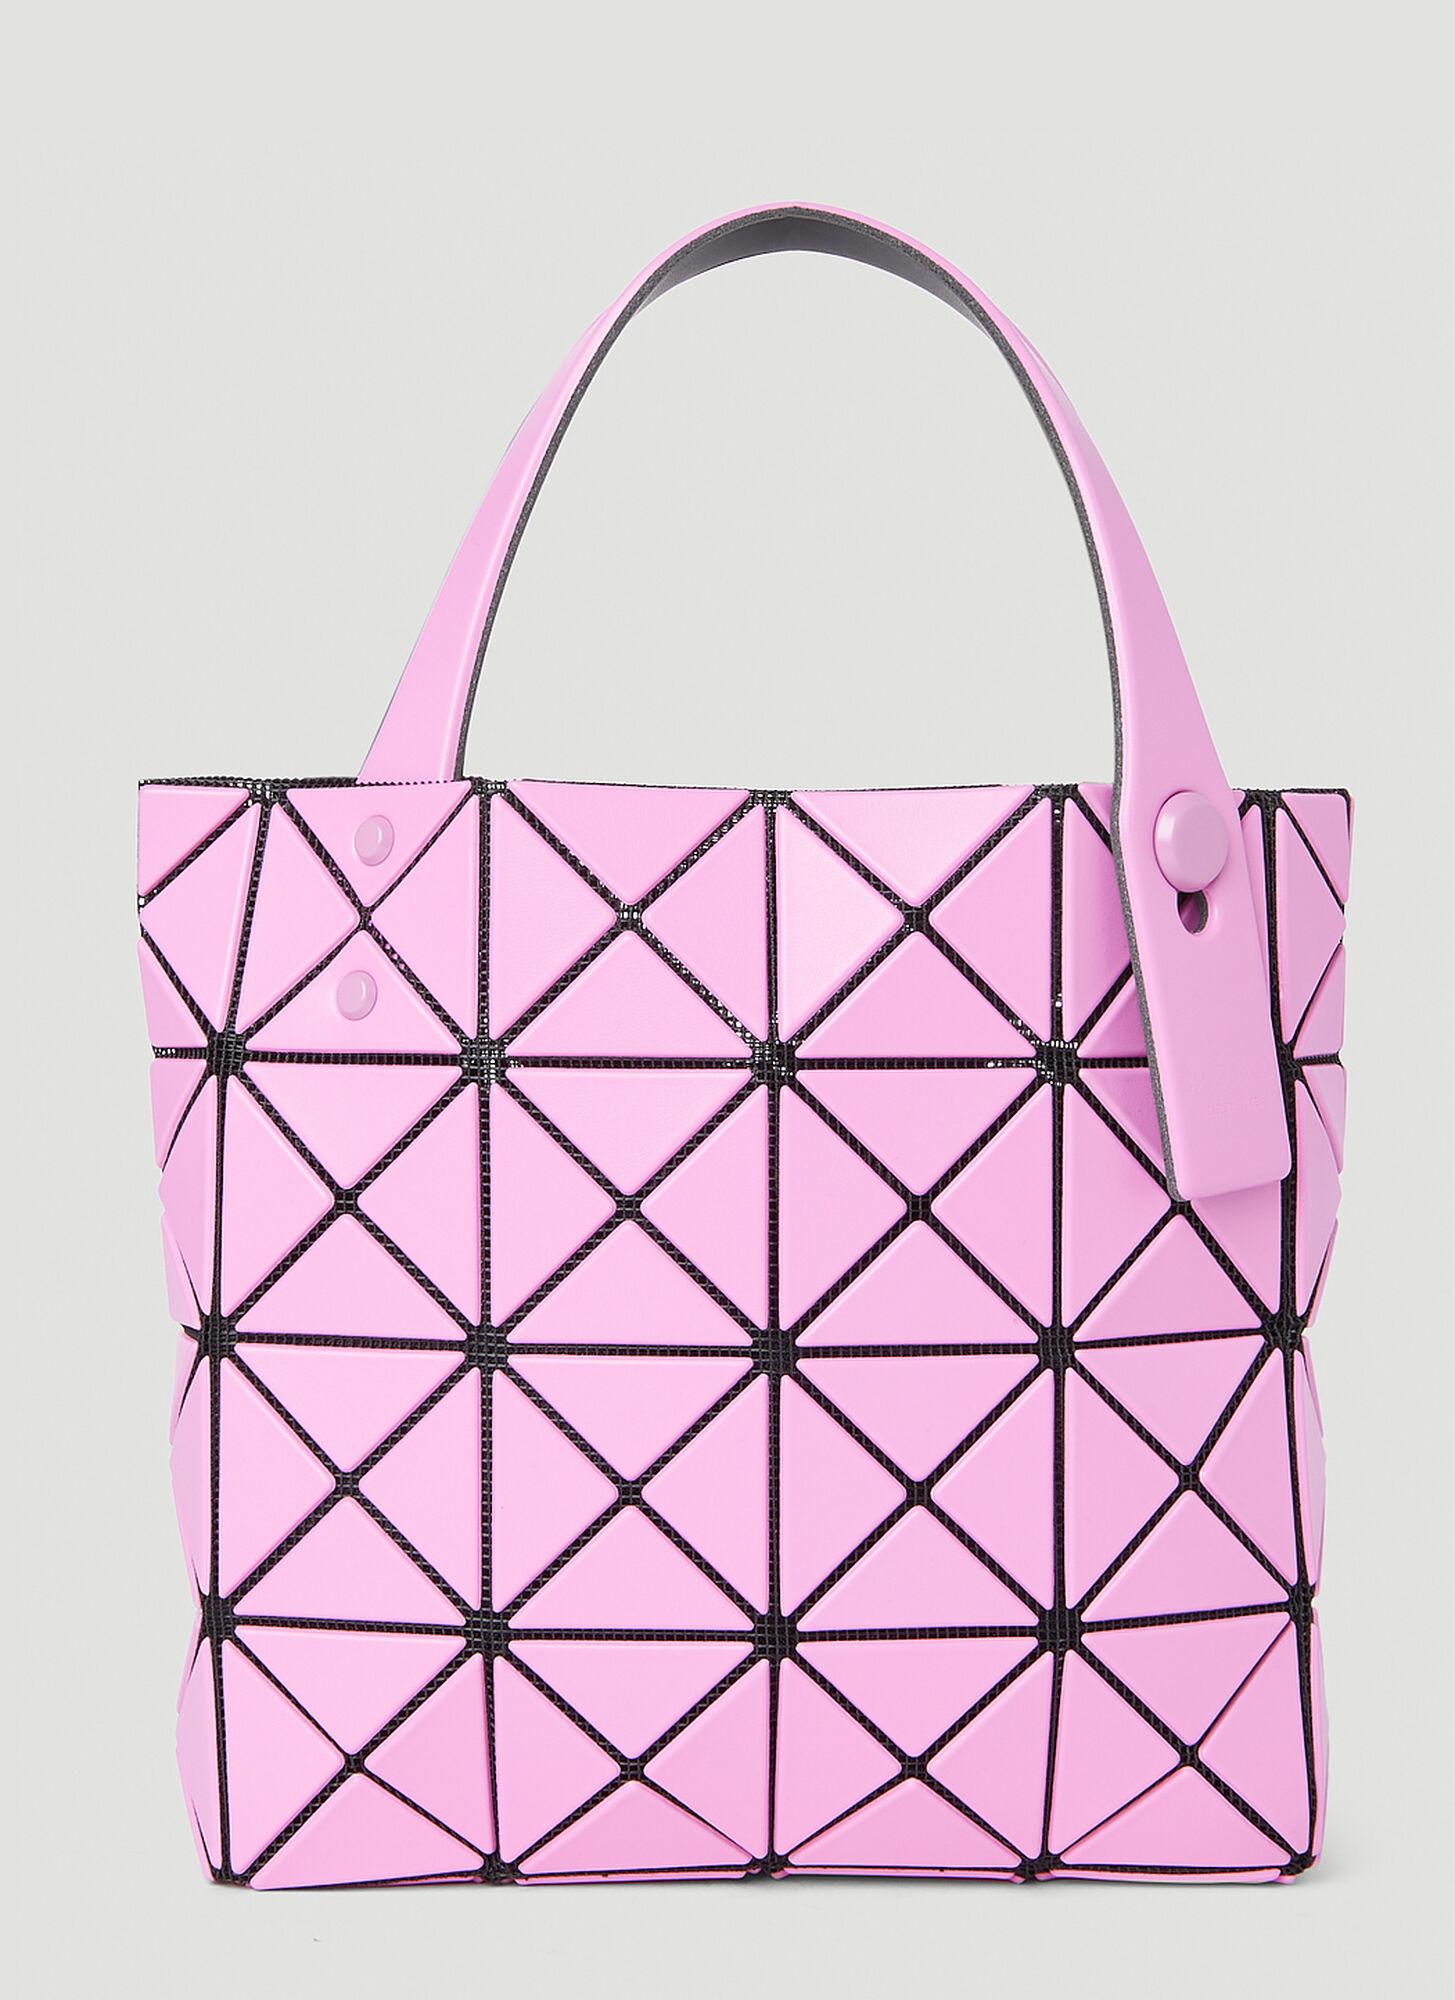 Bao Bao Issey Miyake Lucent Boxy Tote Bag in Pink | Lyst